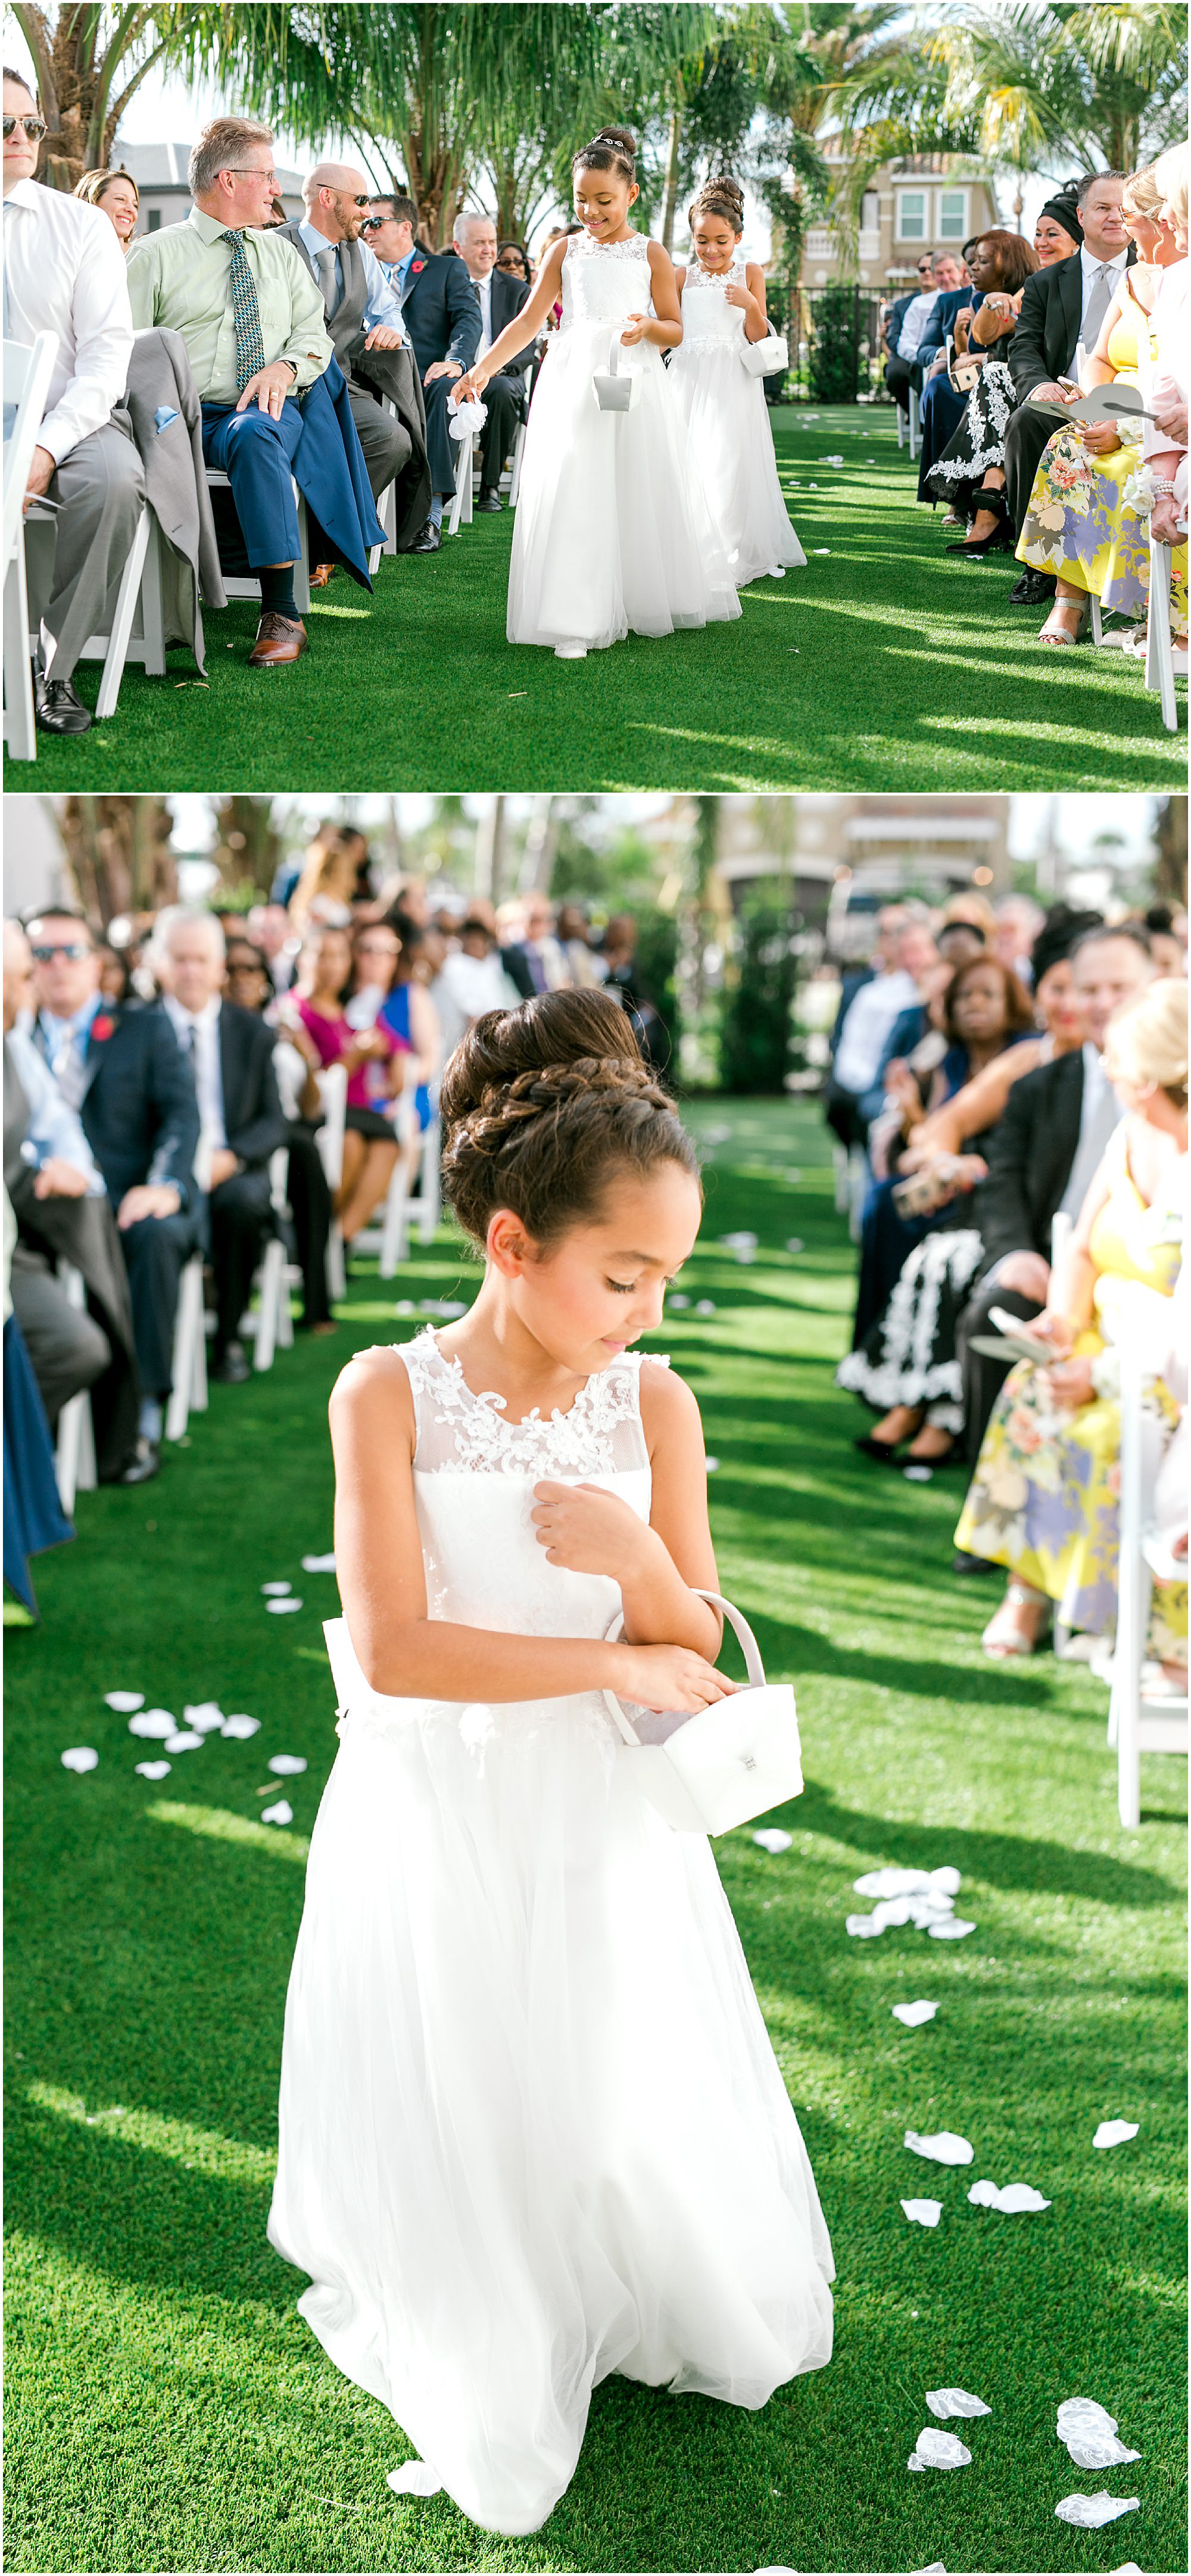 Flower girls walking down the aisle at outdoor wedding while guests wait for the bride to walk down the aisle. 